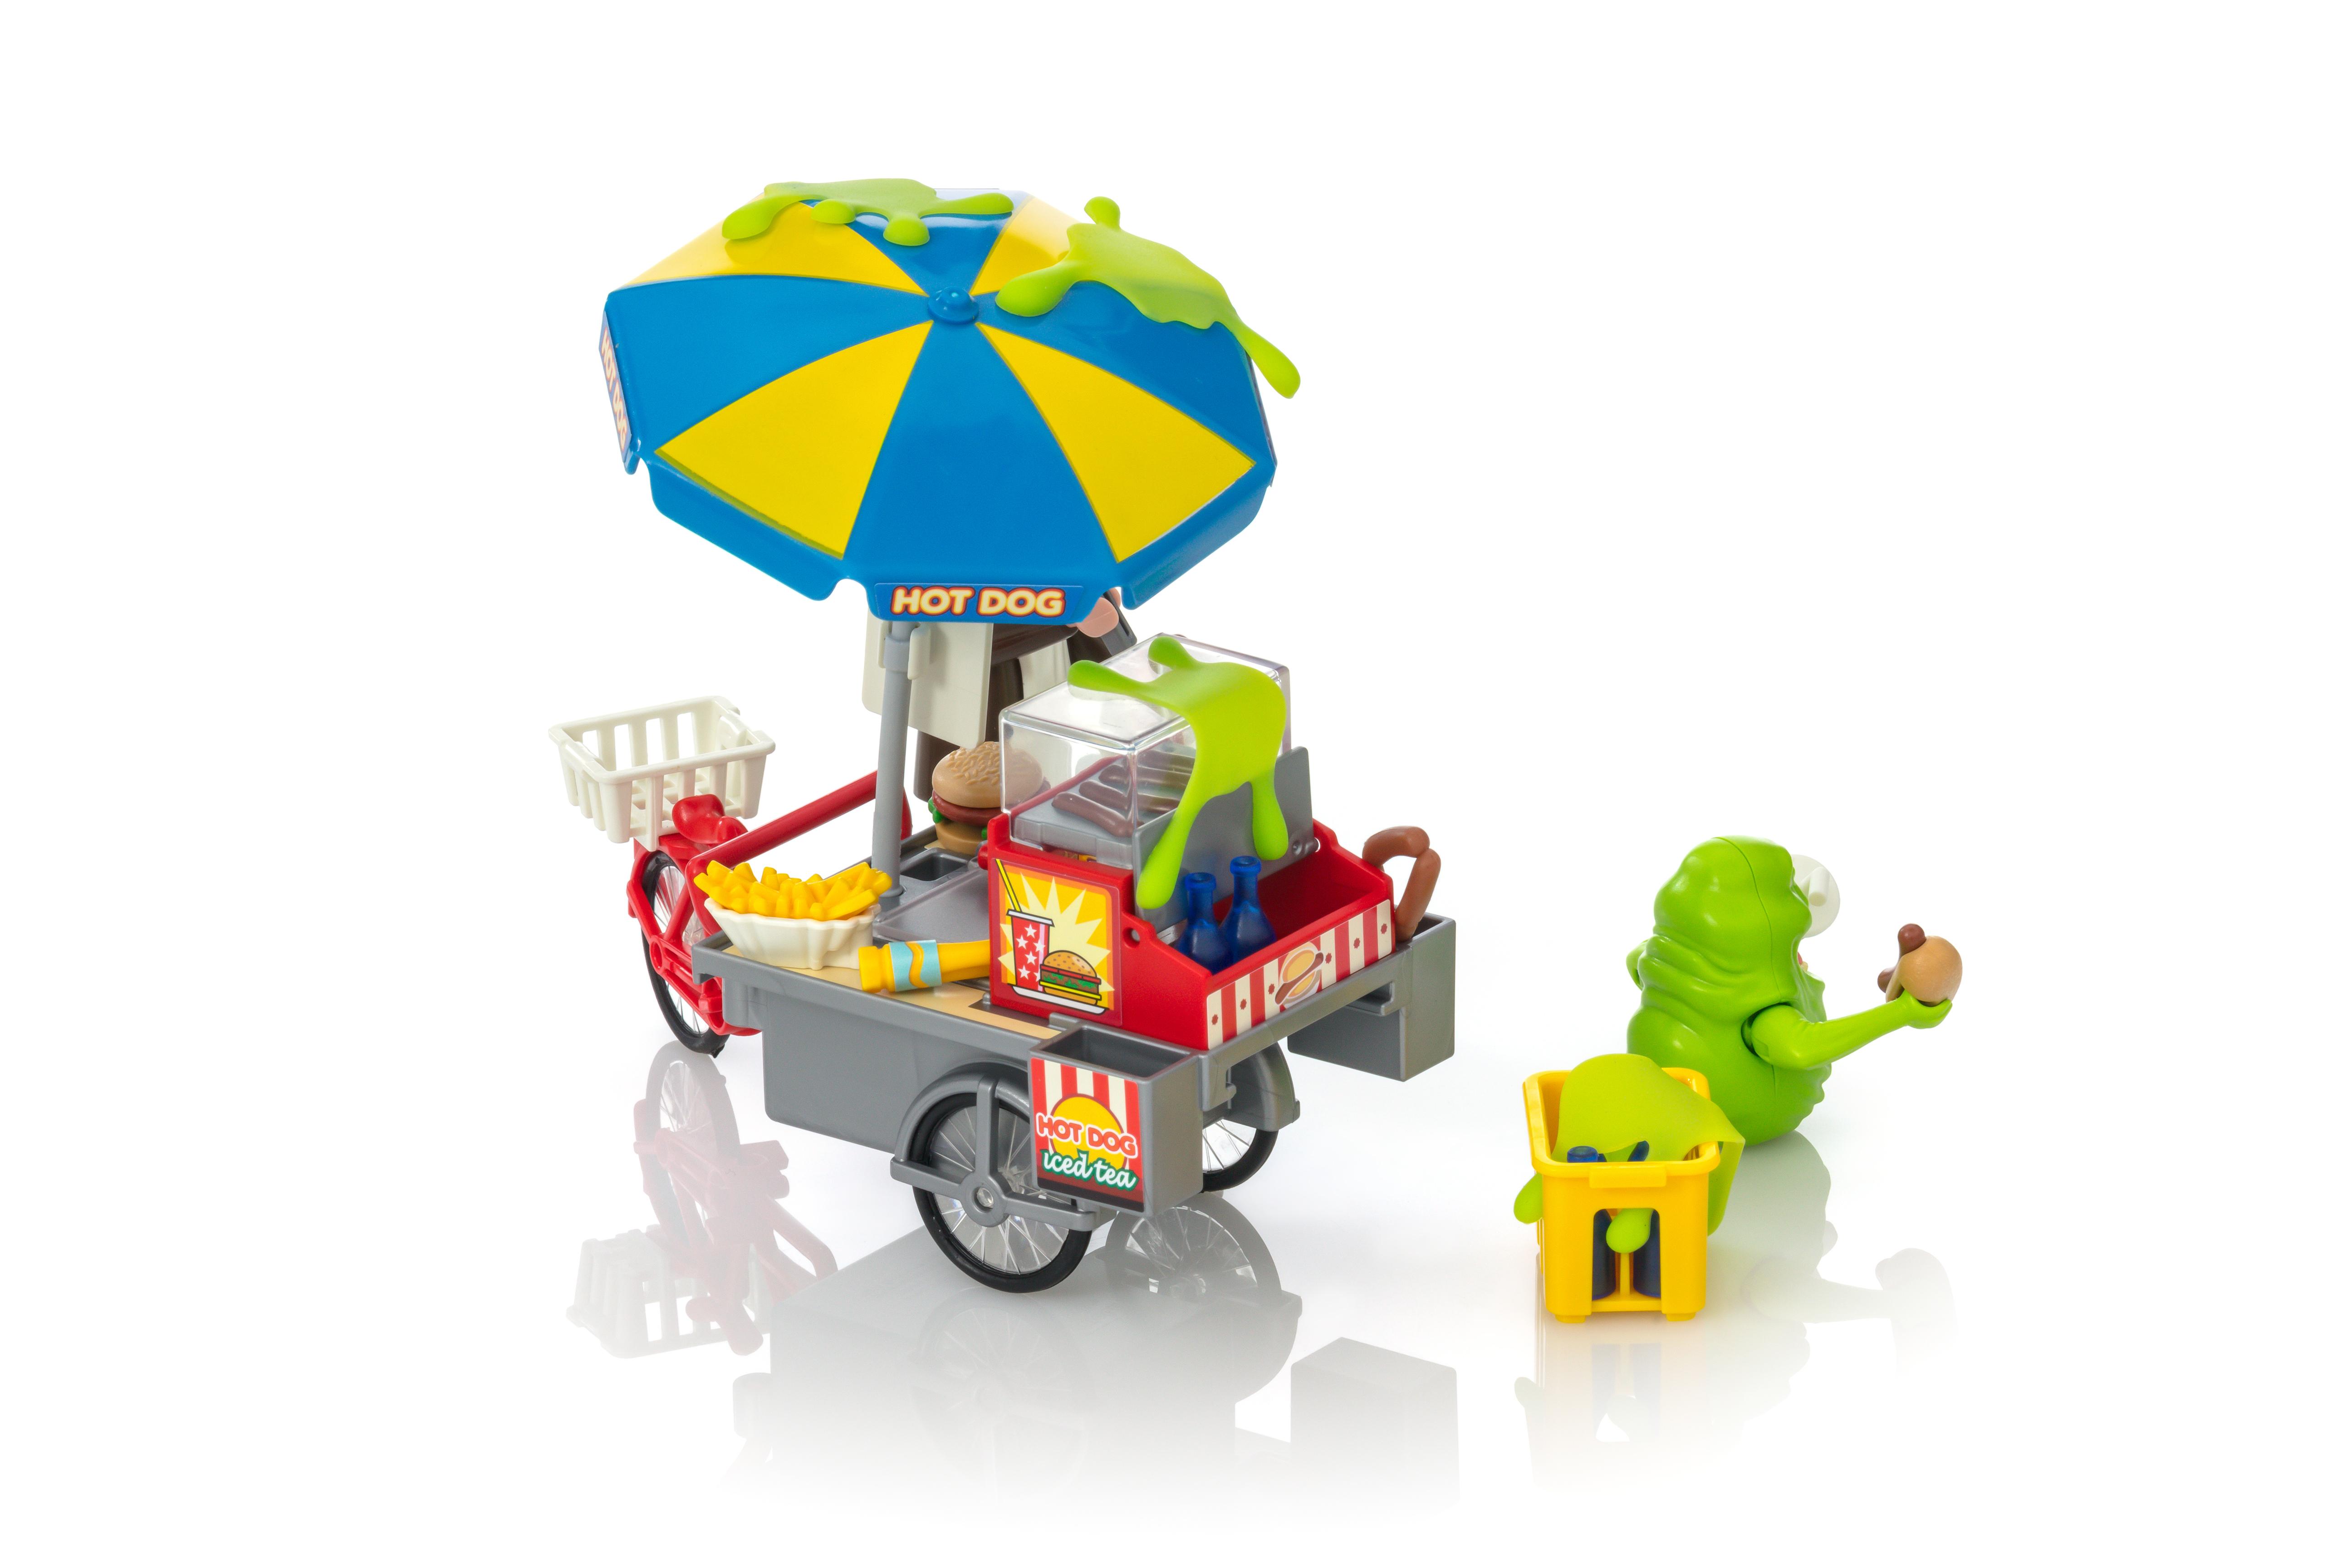 PLAYMOBIL 9222 Ghostbusters Hot Dog Stand with Slimer Playset for sale online